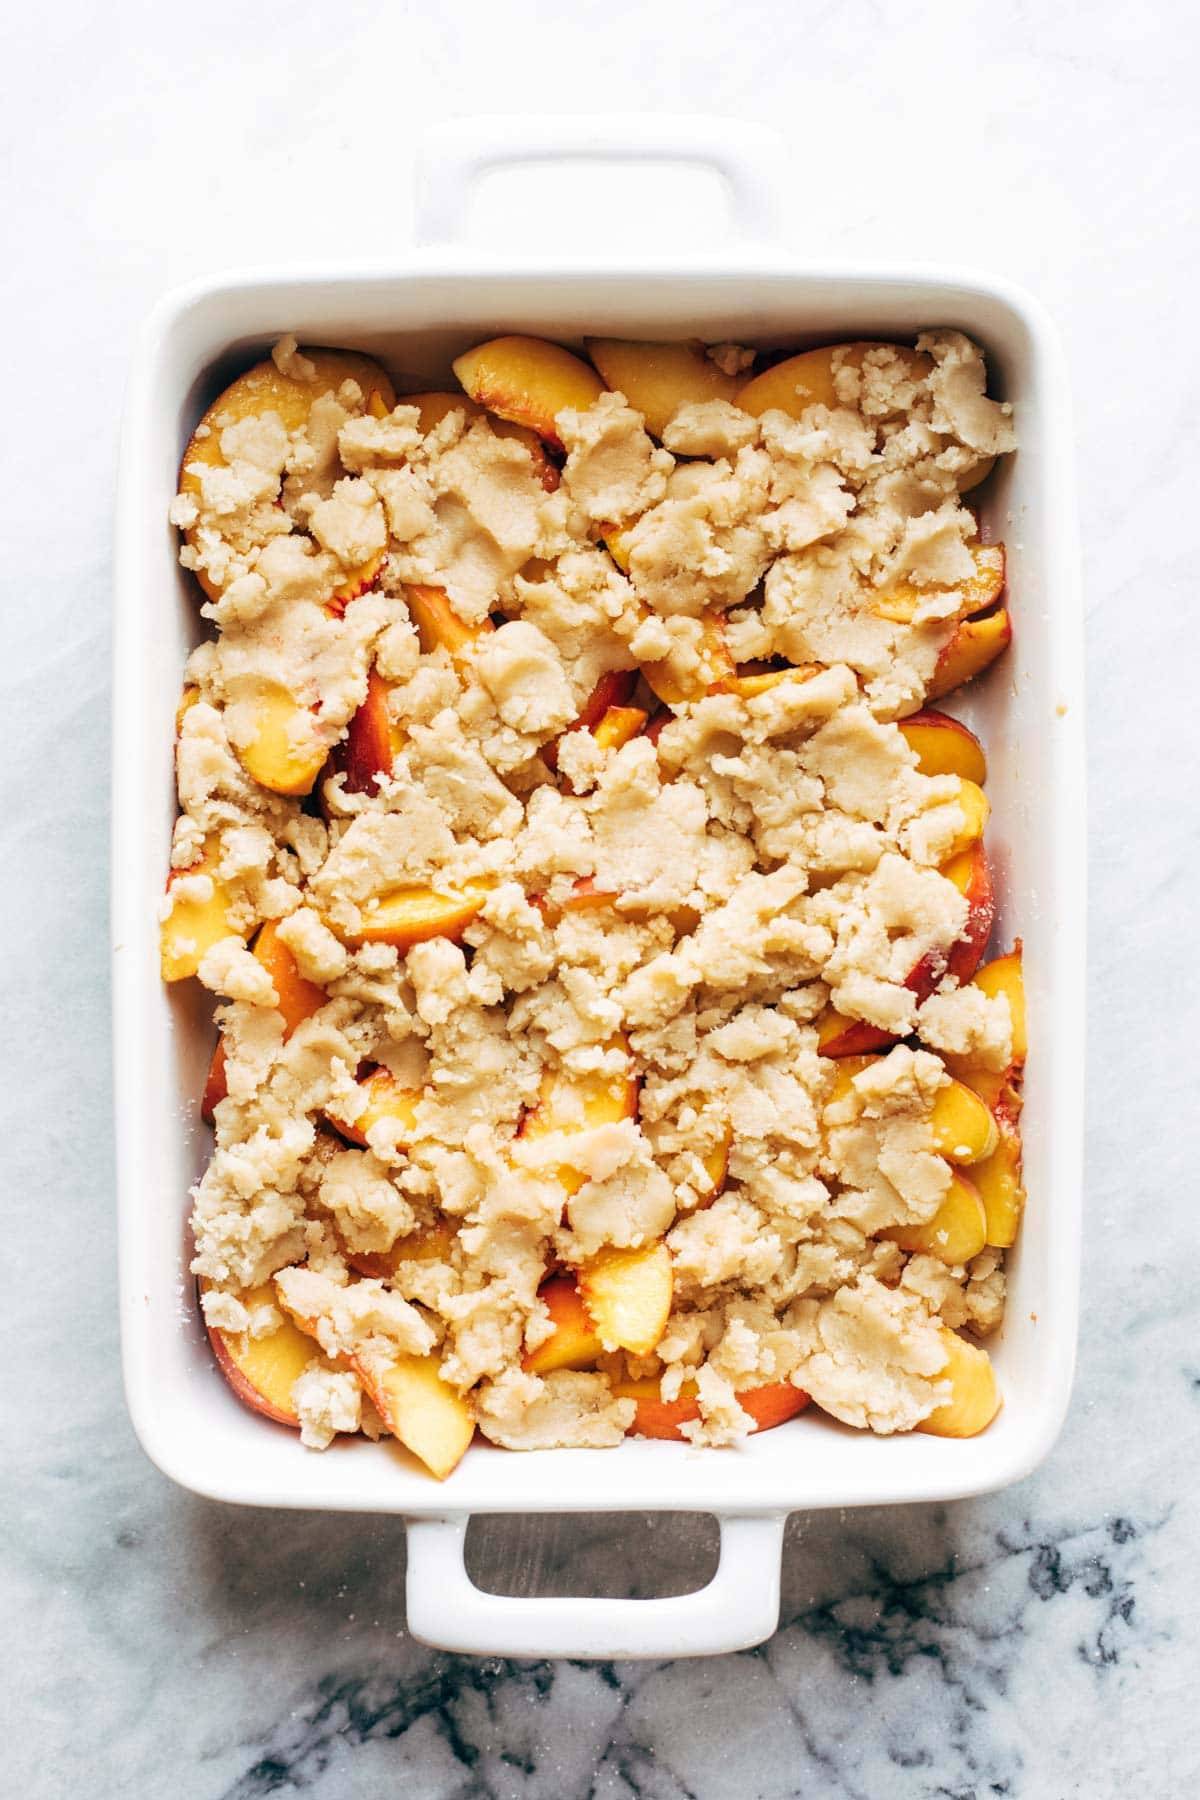 Peach cobbler assembled in a dish and ready to be baked. 